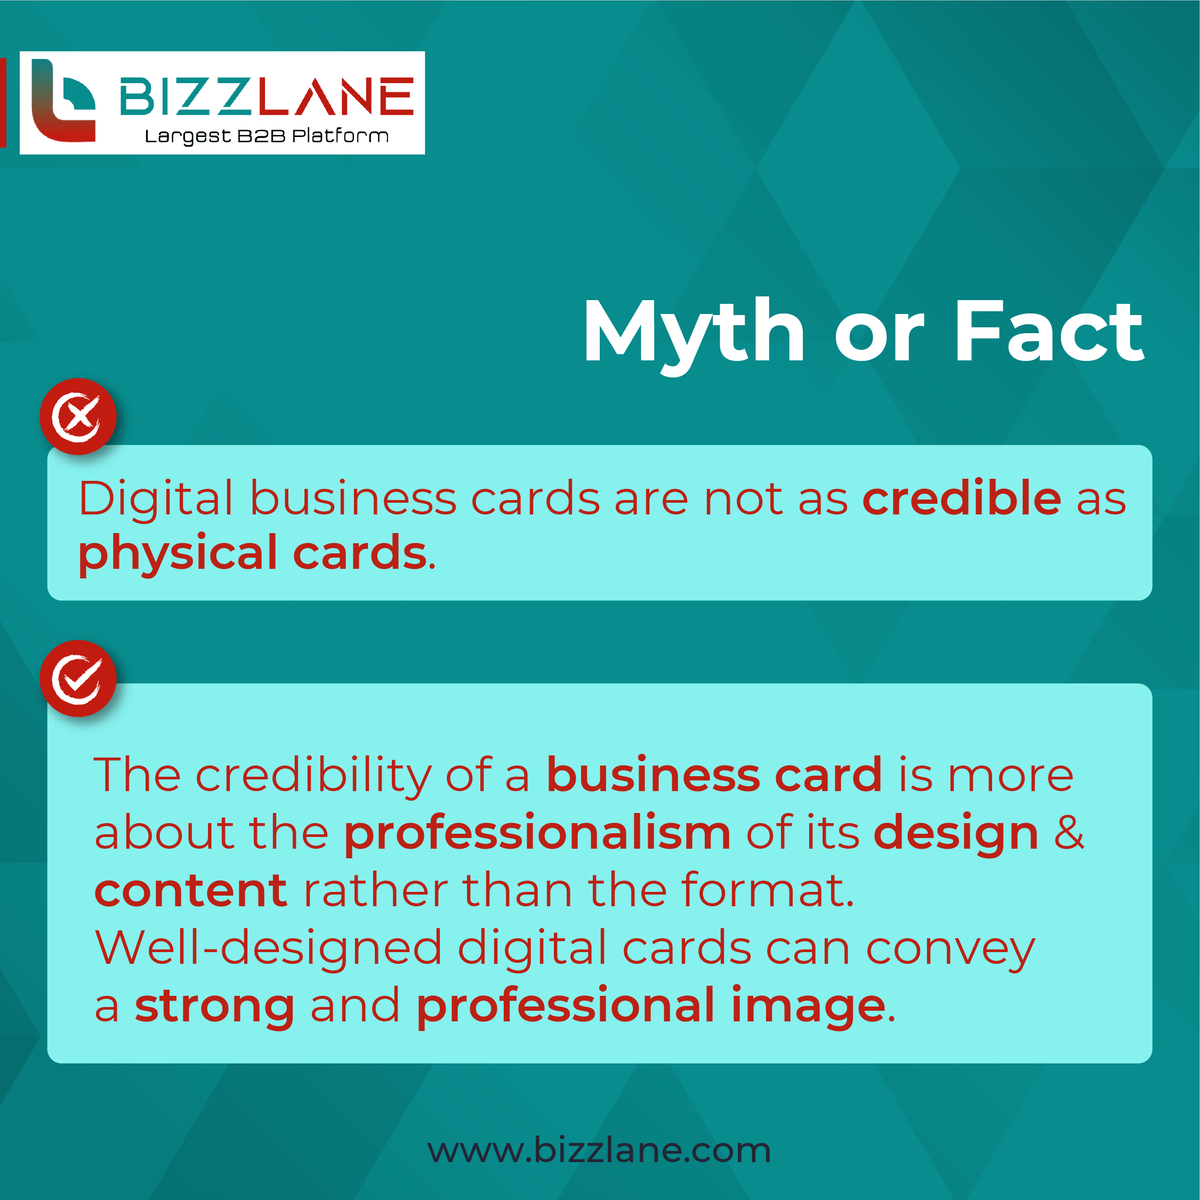 Myth or Fact

#bizzlane #NFCcards #bizzlanecard #nfcbusinesscard #JoinUsNow #NFCtechnology #MythOrFact #myths #fact #Credible #PhysicalCard #professionalism #strong #professionalimage